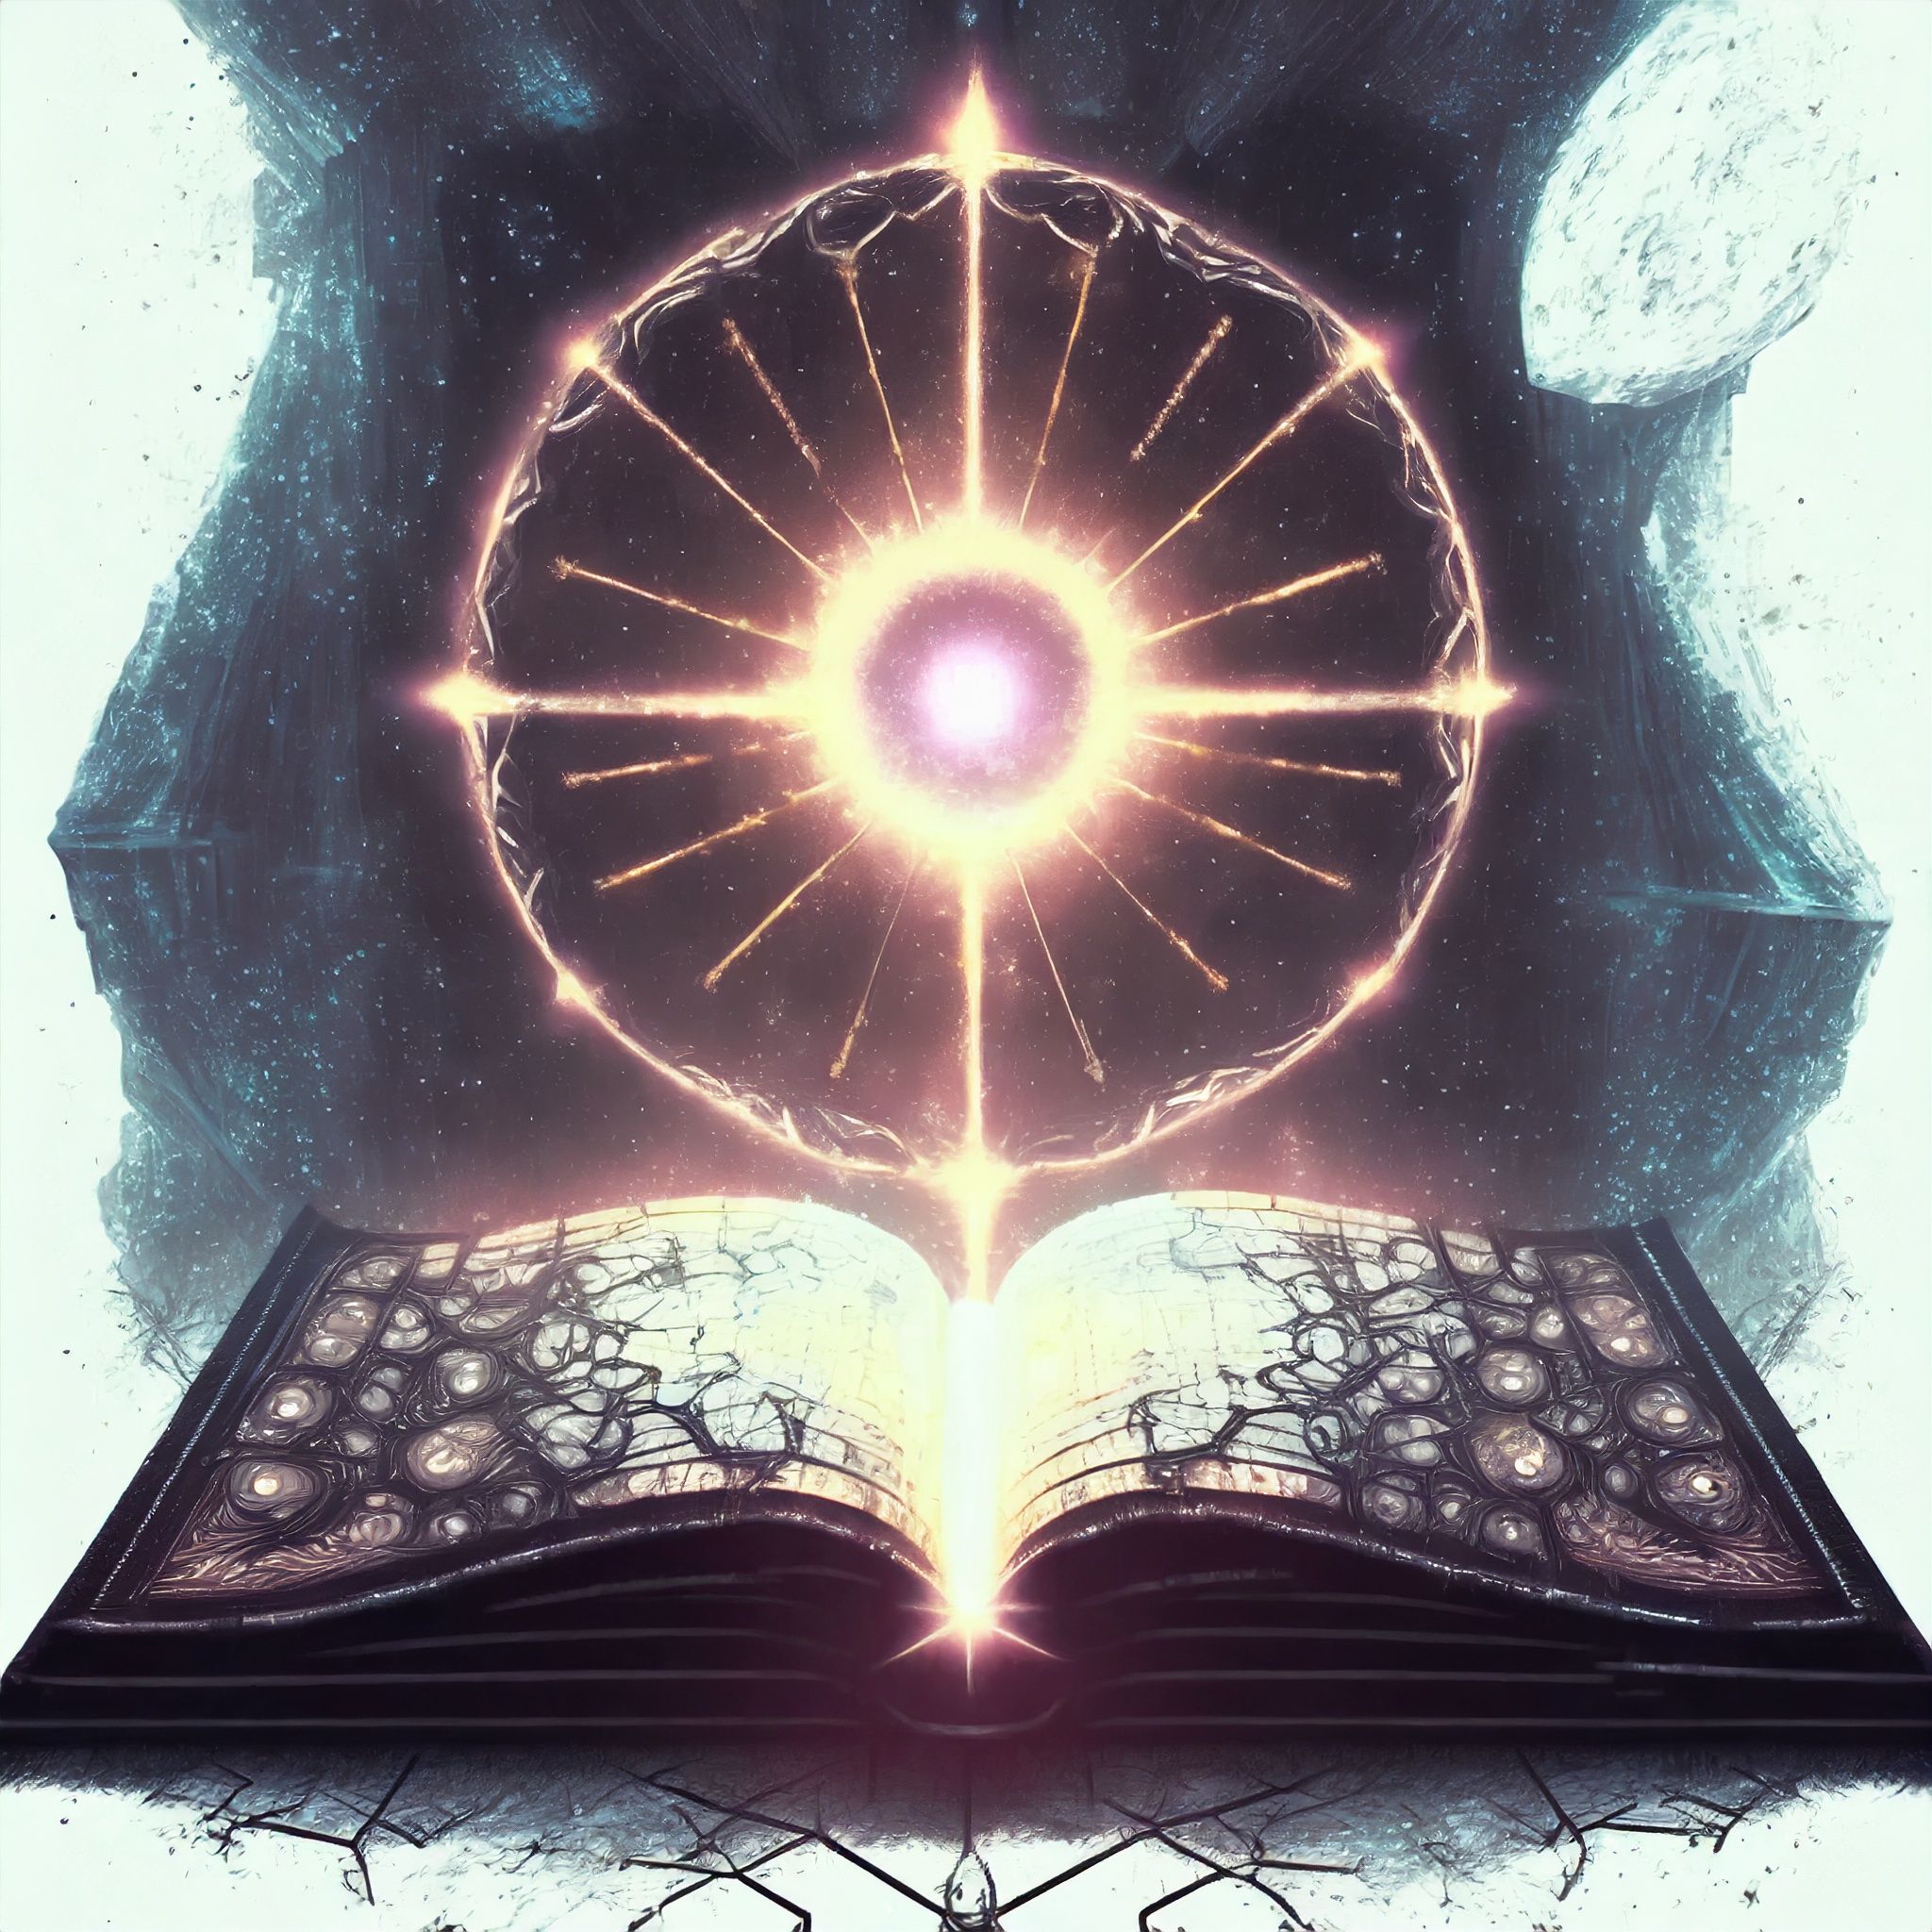 The Final Book of mankind. An ancient text is opened and a ball of energy and light emerges, its insides appearing like the cosmos.